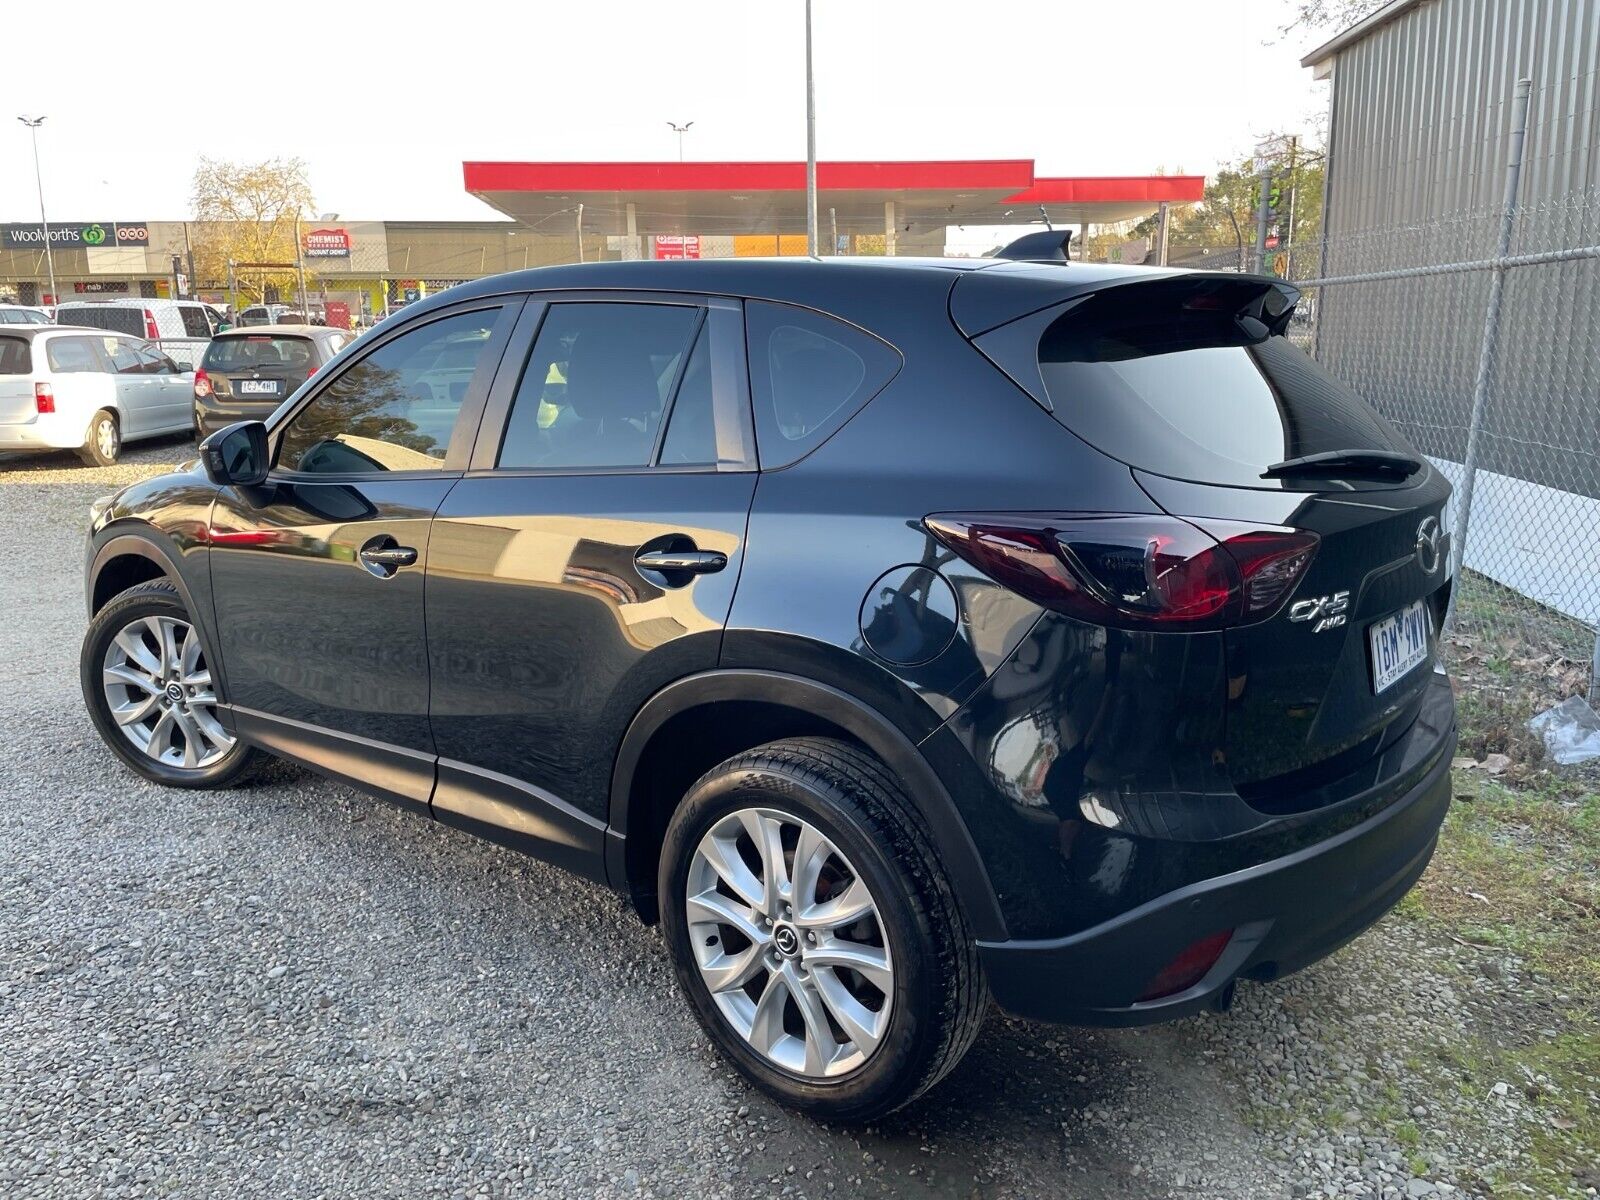 2014 MAZDA CX-5 GRAND TOURING TURBO DIESEL AUTO SELLING NO RESERVE AUCTION